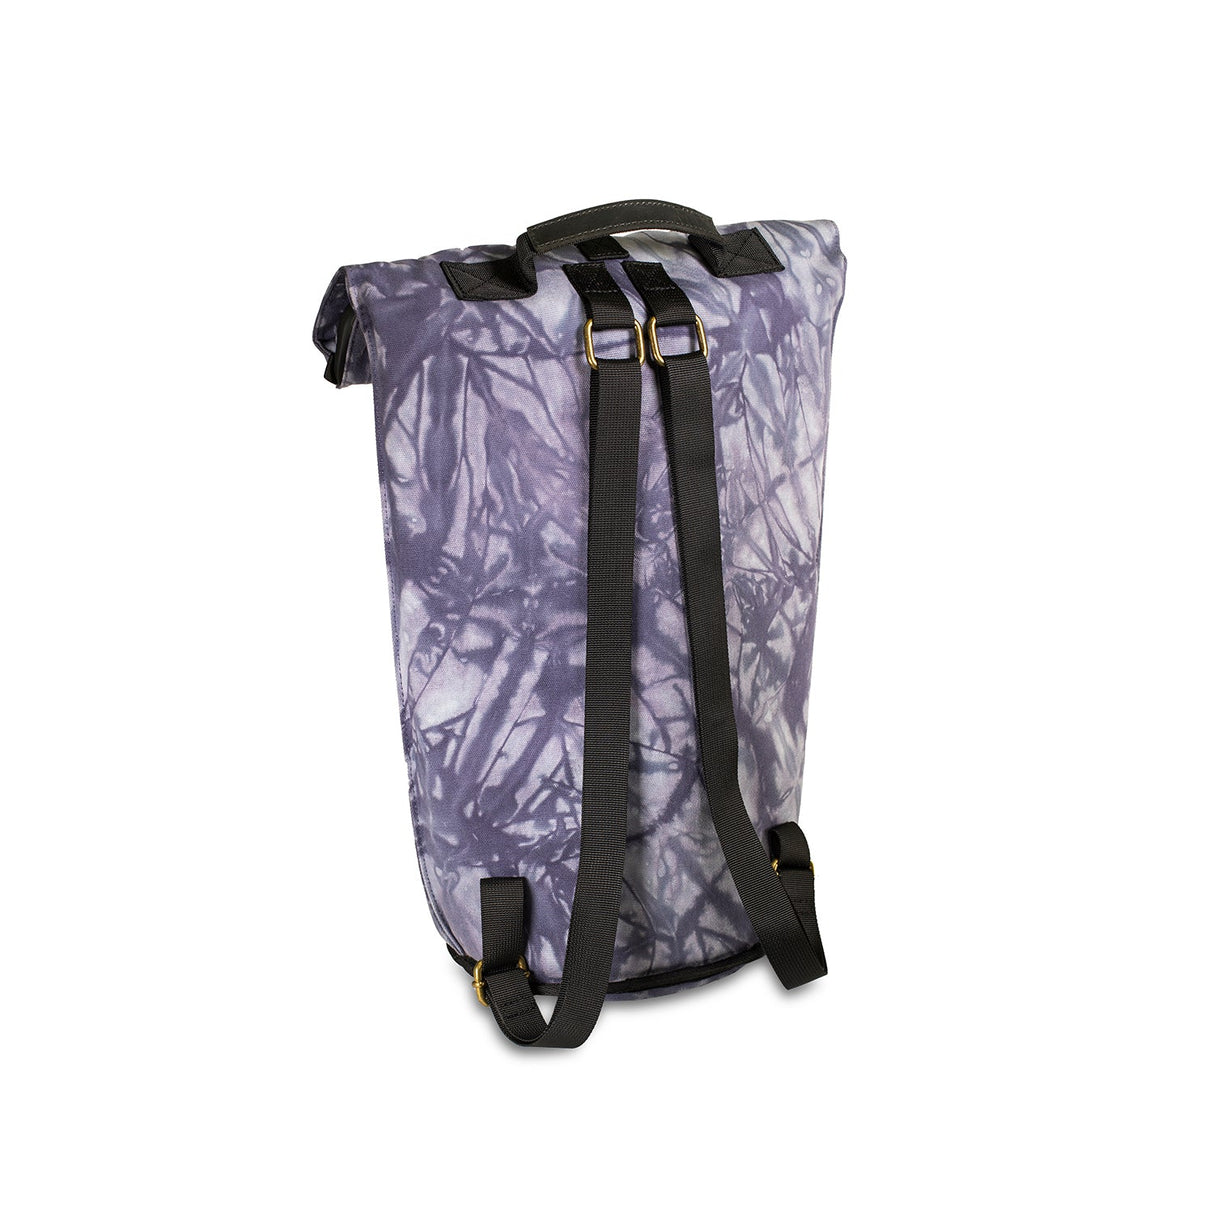 Revelry Supply The Defender - Smell Proof Padded Backpack Front View on White